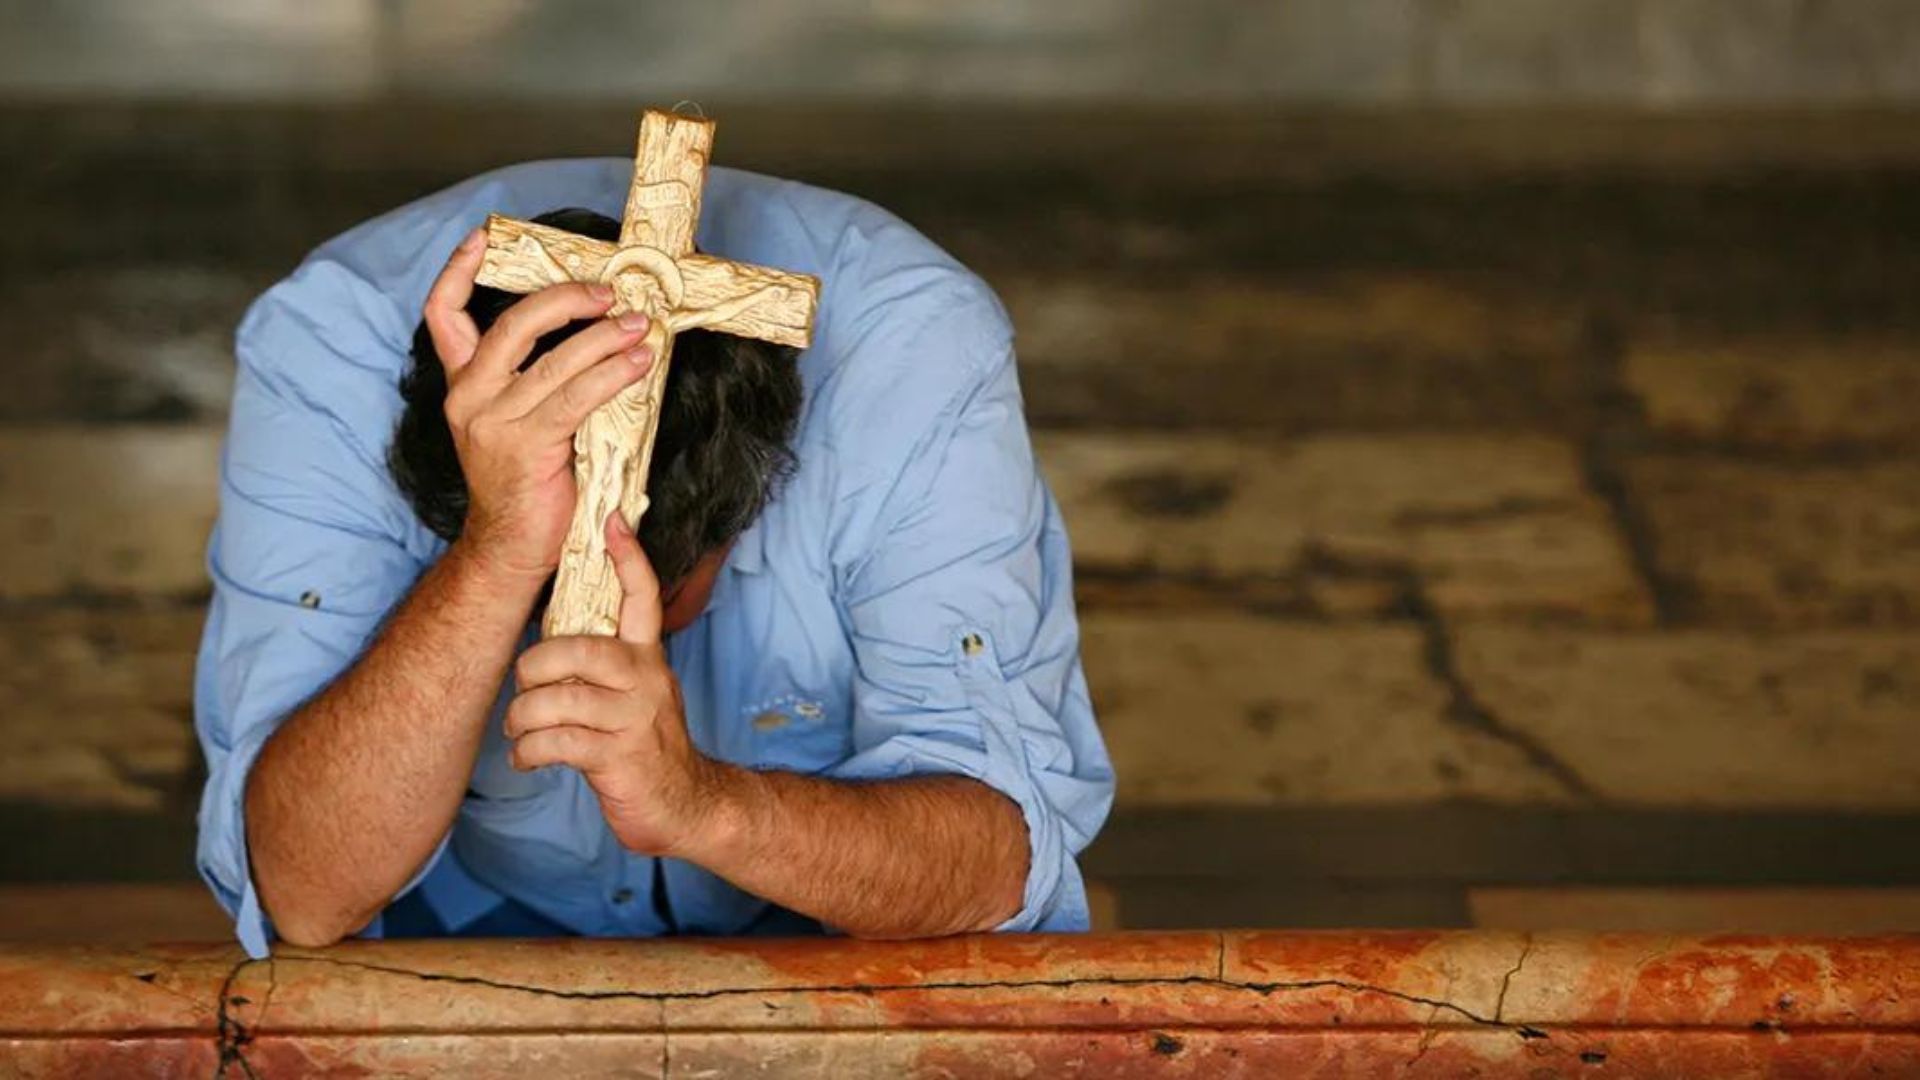 A Man Praying While Holding A Wooden Cross